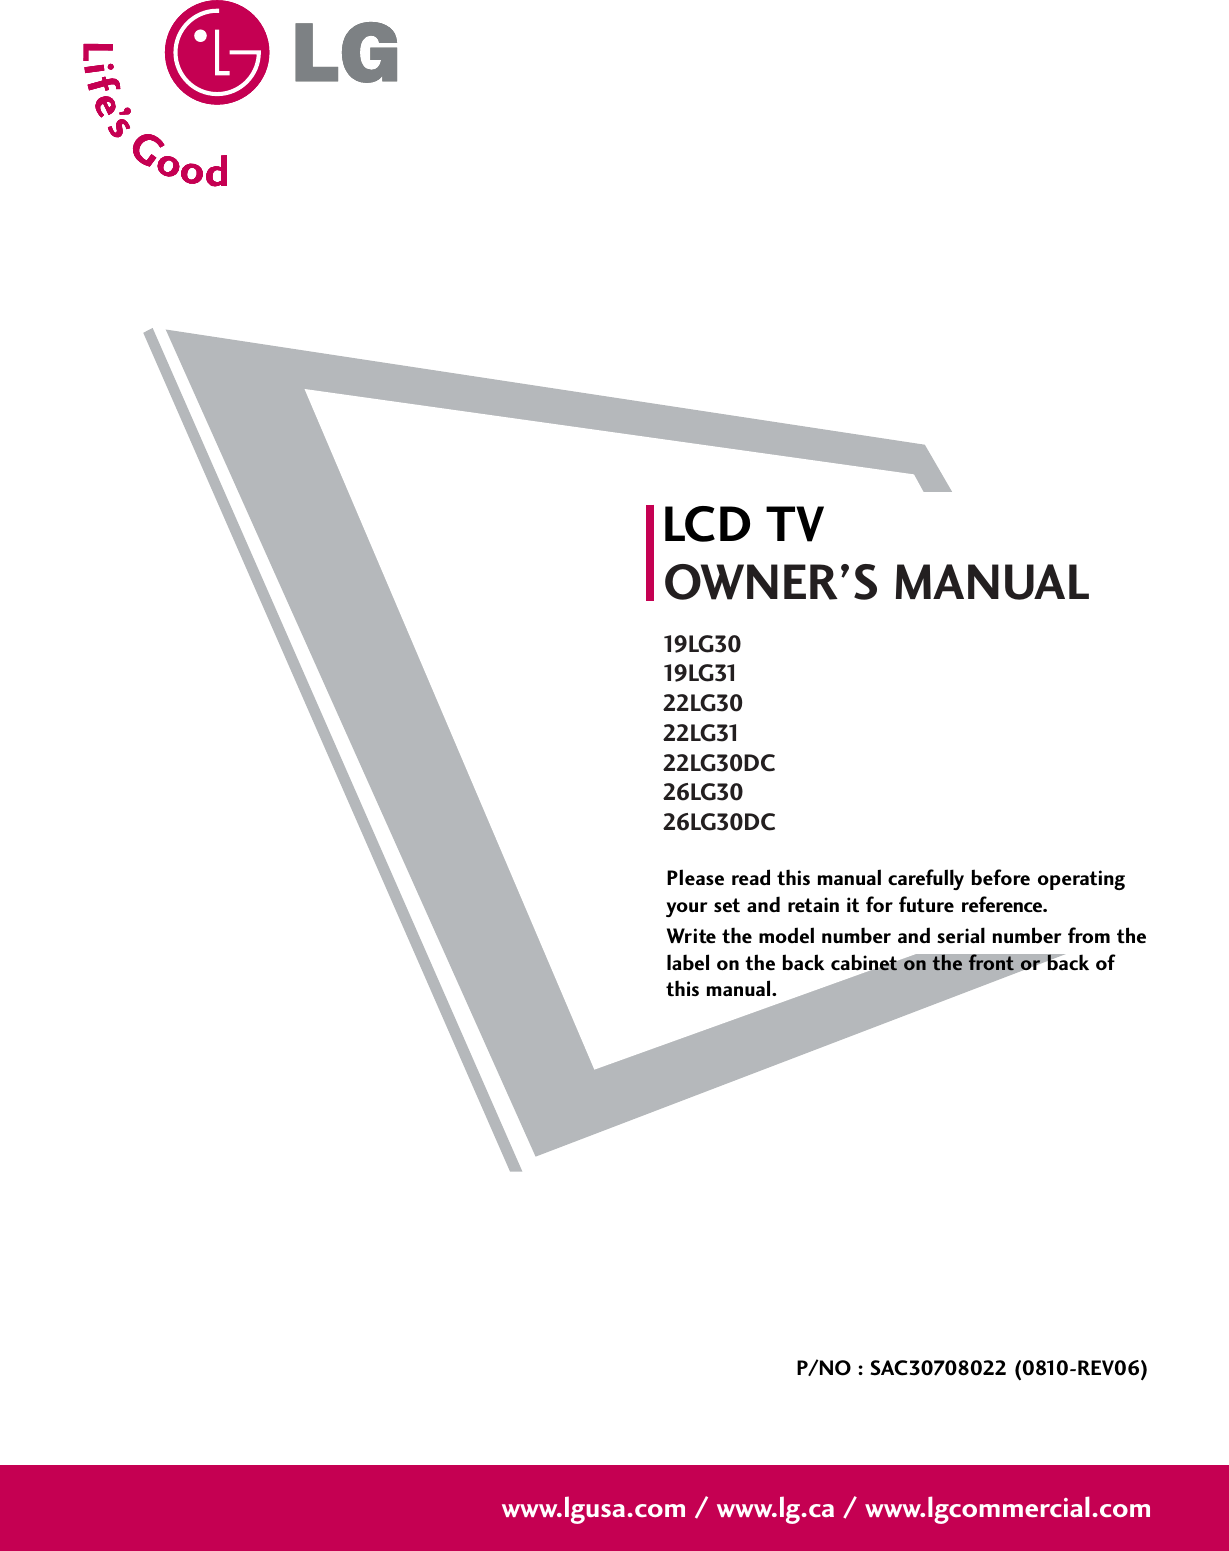 Please read this manual carefully before operatingyour set and retain it for future reference.Write the model number and serial number from thelabel on the back cabinet on the front or back ofthis manual. LCD TVOWNER’S MANUAL19 LG 3019 LG 3122LG3022LG3122LG30DC26LG3026LG30DCP/NO : SAC30708022 (0810-REV06)www.lgusa.com / www.lg.ca / www.lgcommercial.com